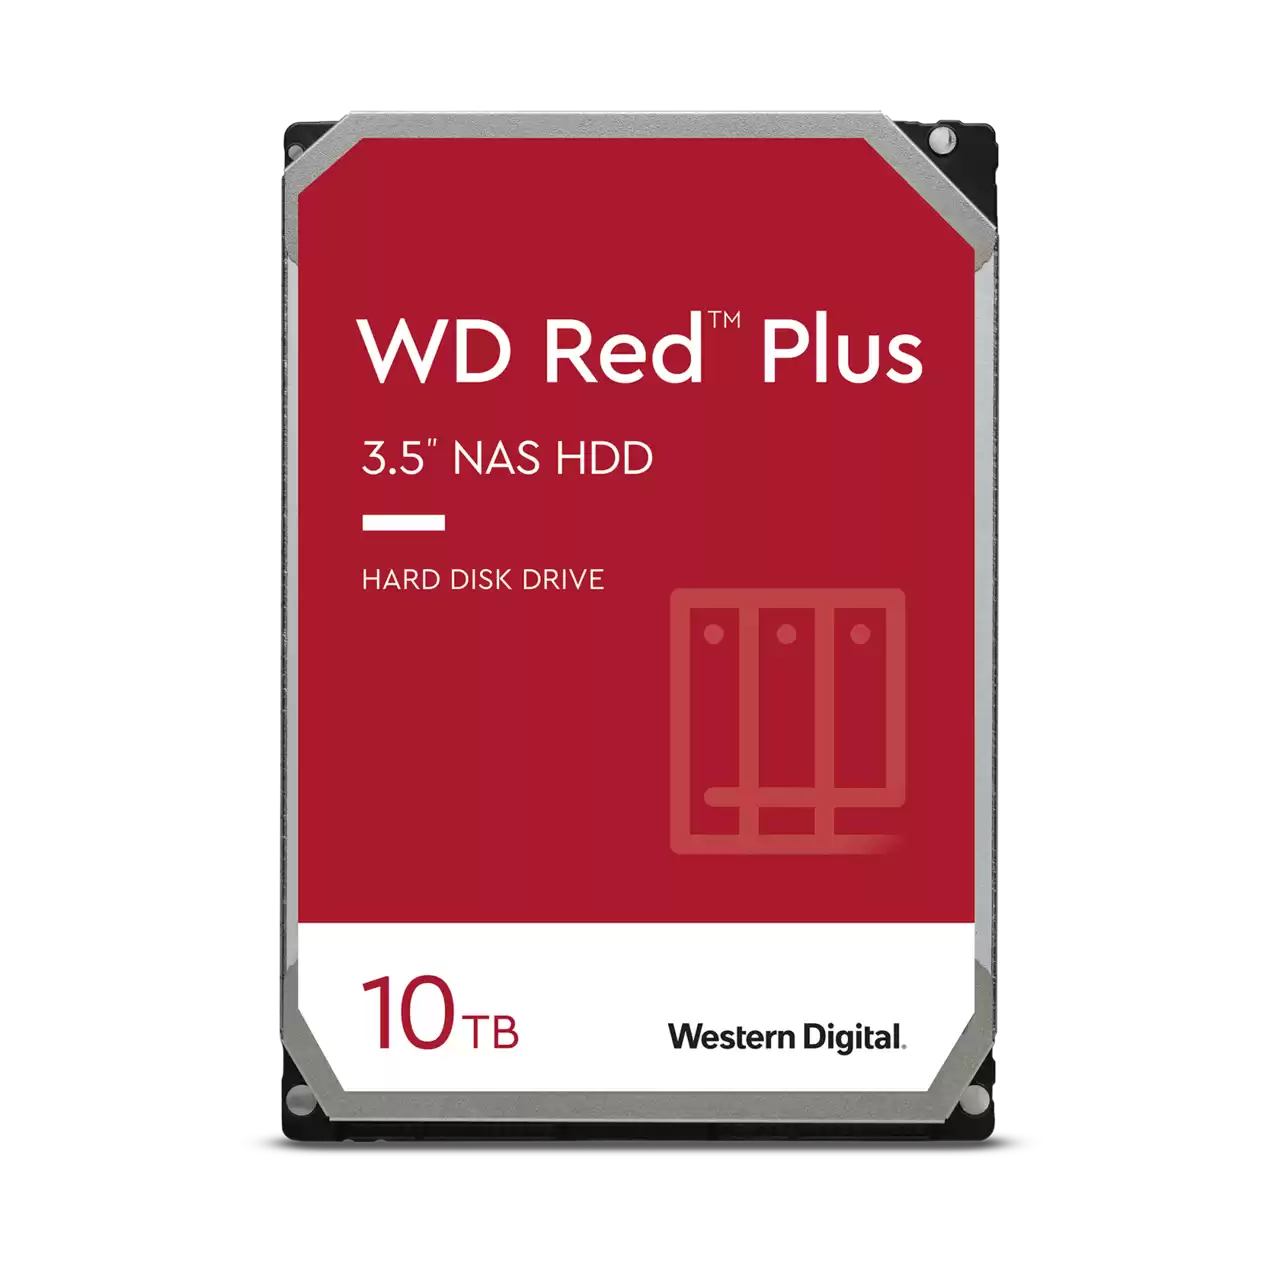 WD Red Plus 10TB 7200rpm 256MB 3.5" NAS HDD (WD101EFBX)